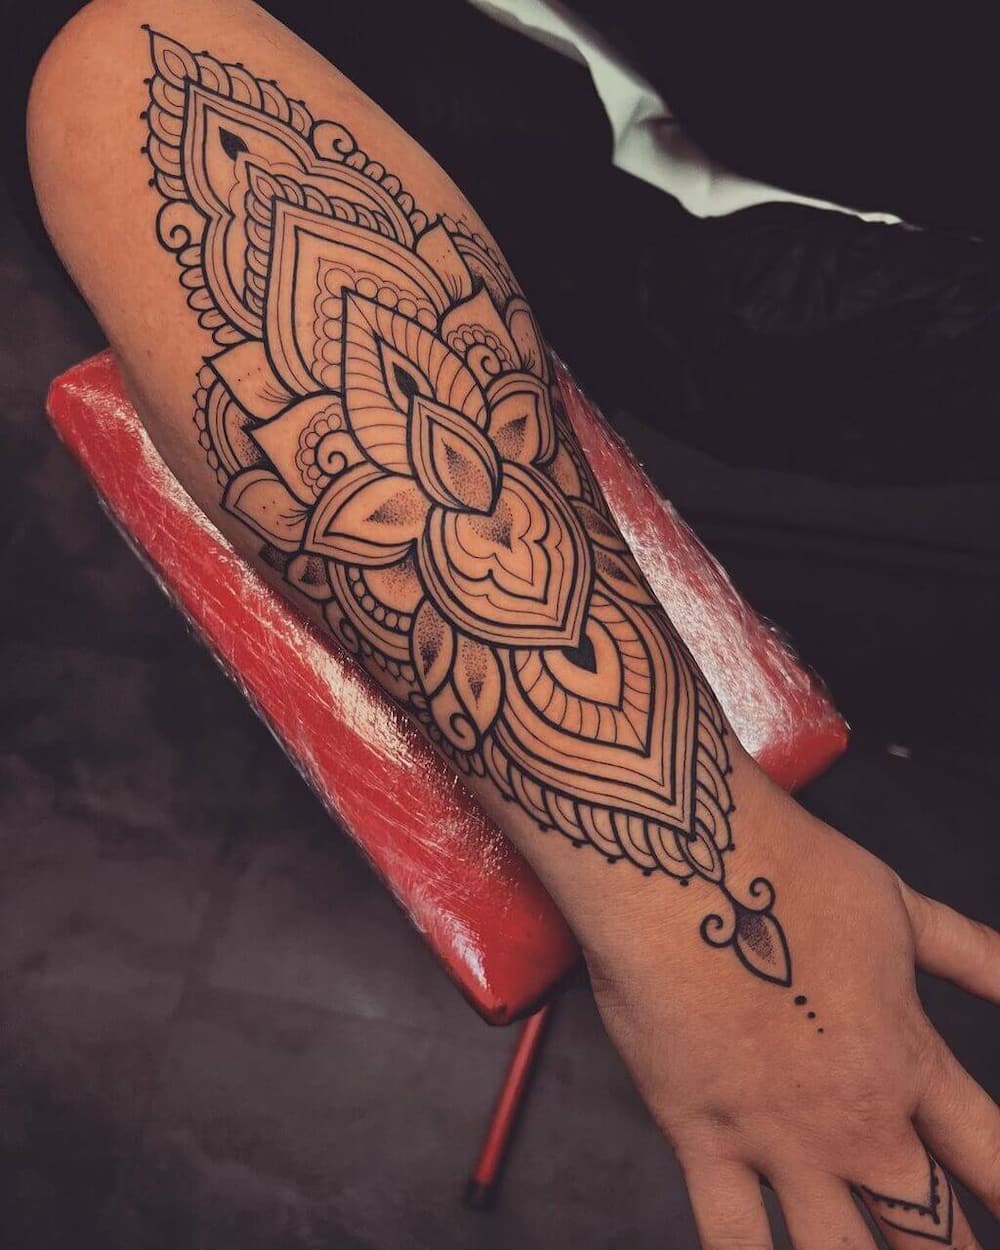 30+ unique women's outer forearm tattoo designs that will inspire you -  